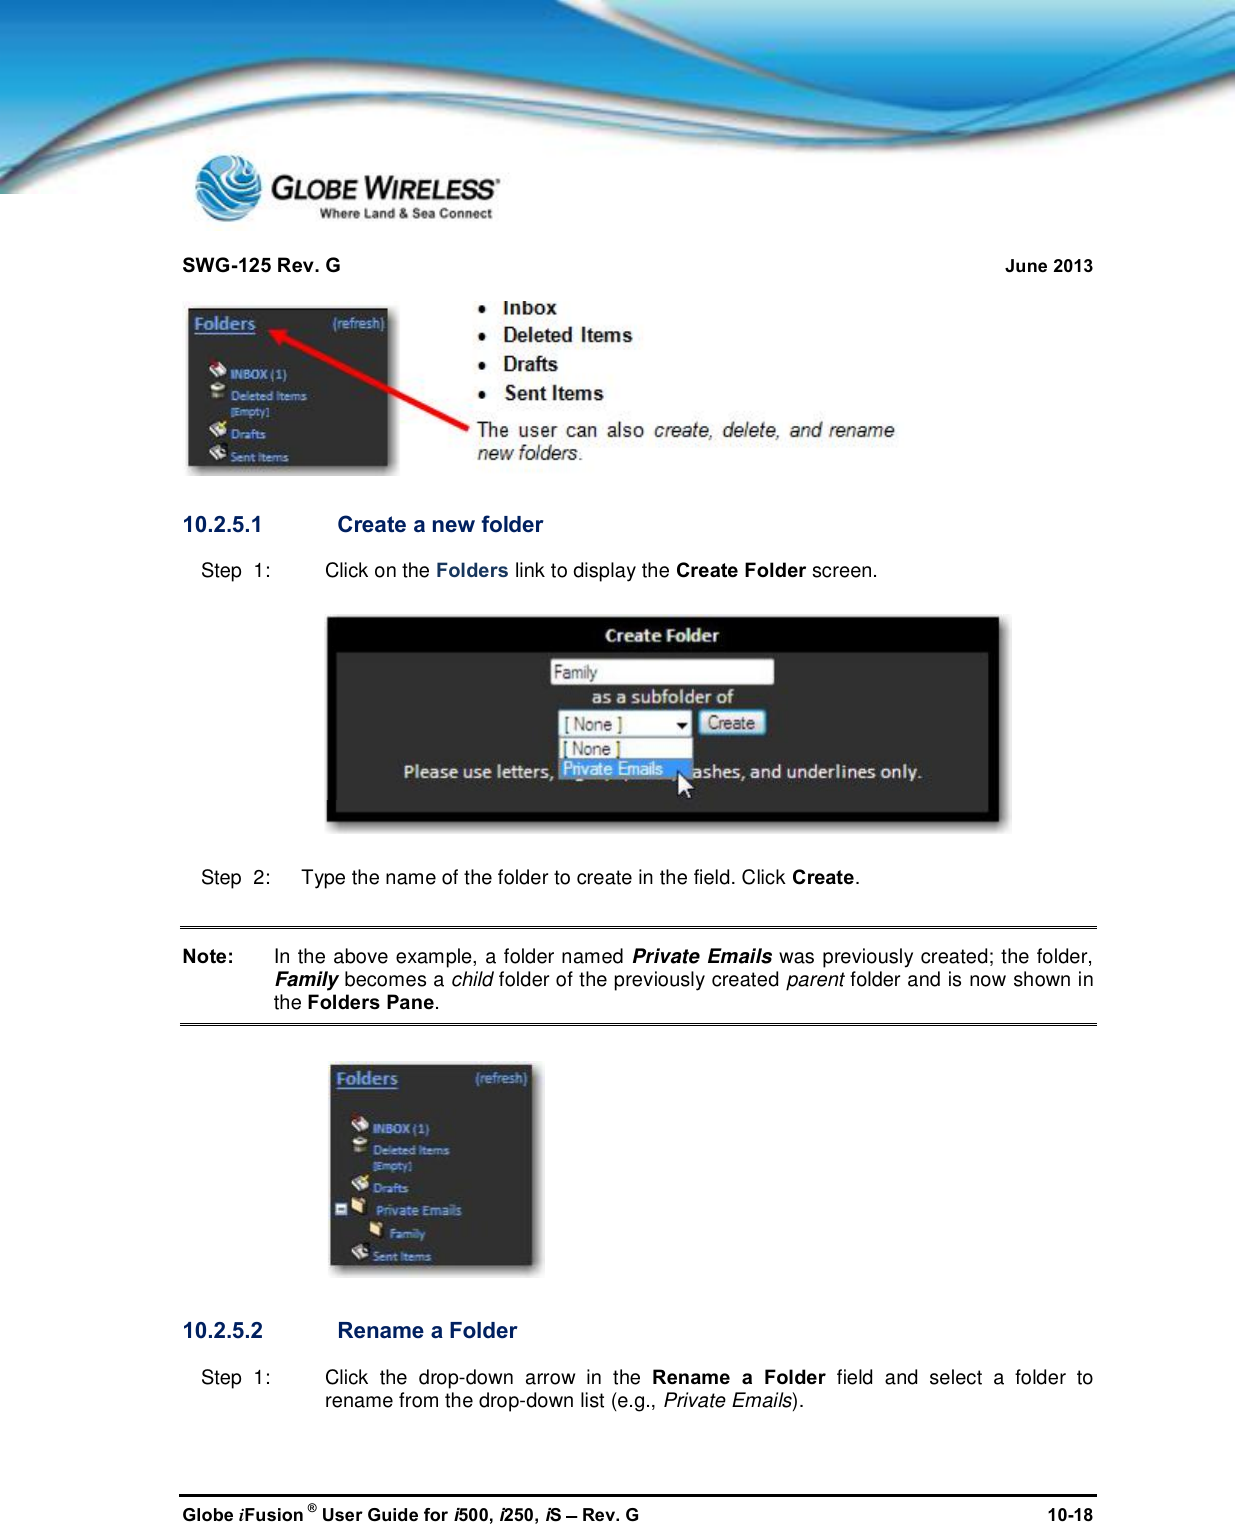 SWG-125 Rev. G June 2013Globe iFusion ®User Guide for i500, i250, iSRev. G 10-1810.2.5.1 Create a new folderStep  1: Click on the Folders link to display the Create Folder screen.Step  2:   Type the name of the folder to create in the field. Click Create.Note: In the above example, a folder named Private Emails was previously created; the folder,Family becomes a child folder of the previously created parent folder and is now shown inthe Folders Pane.10.2.5.2 Rename a FolderStep  1: Click the drop-down arrow in the Rename a Folder field and select a folder torename from the drop-down list (e.g., Private Emails).